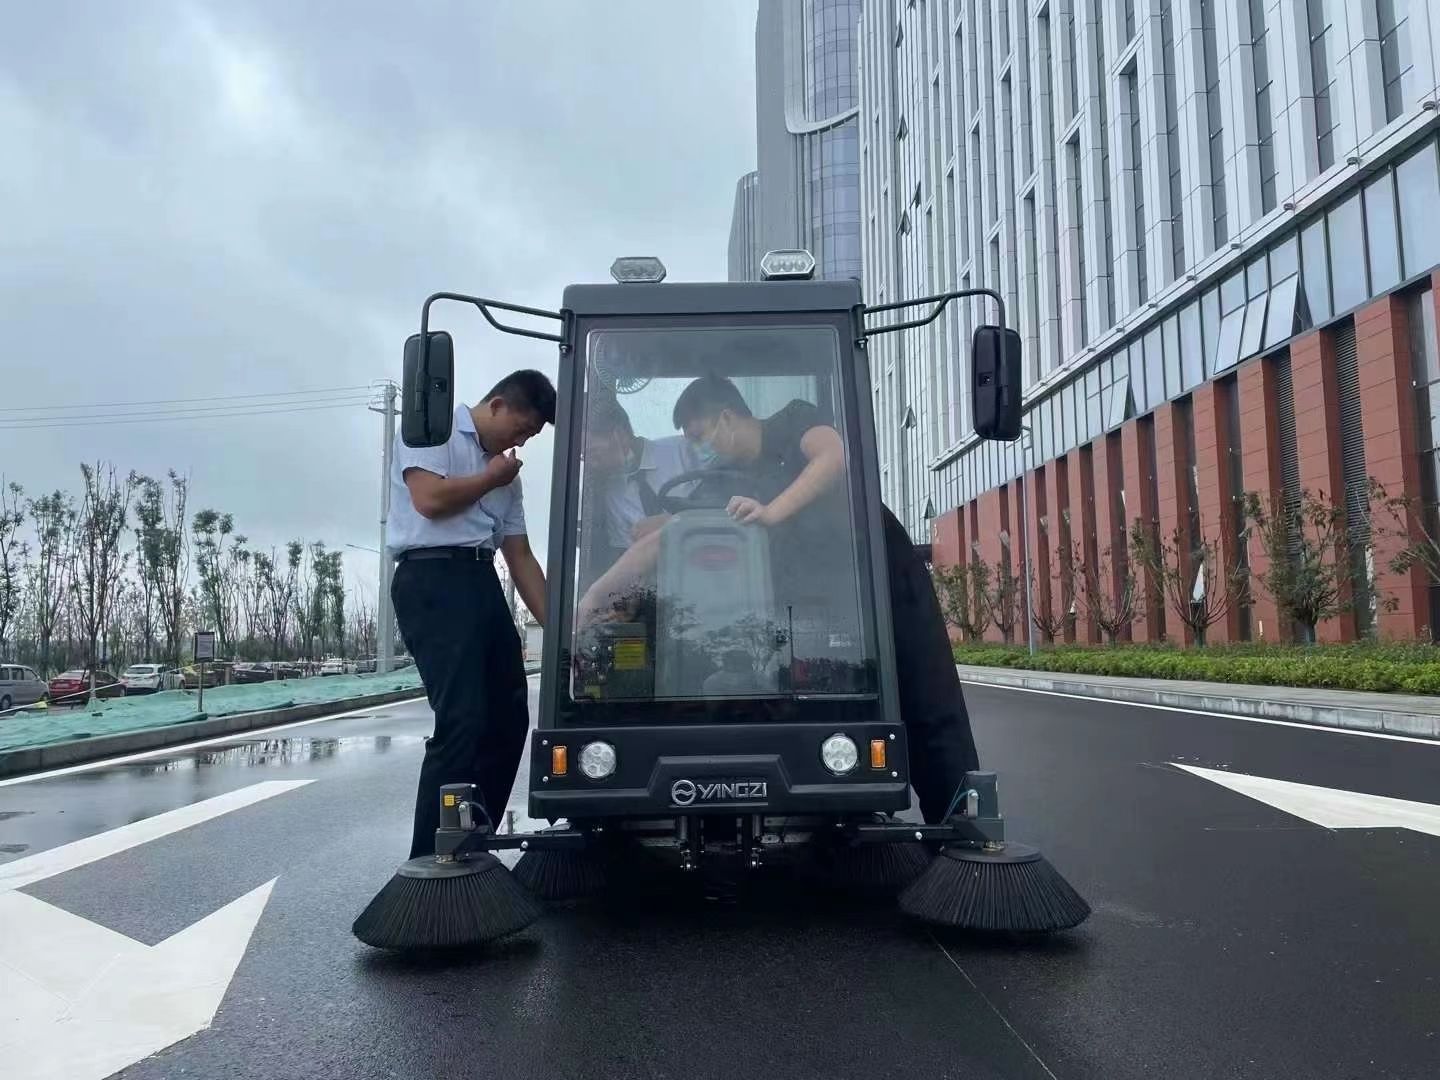 Yangzi Road Sweeping Machine Automatic Floor Sweeper Ride-on Road Sweeper For Parking Lot